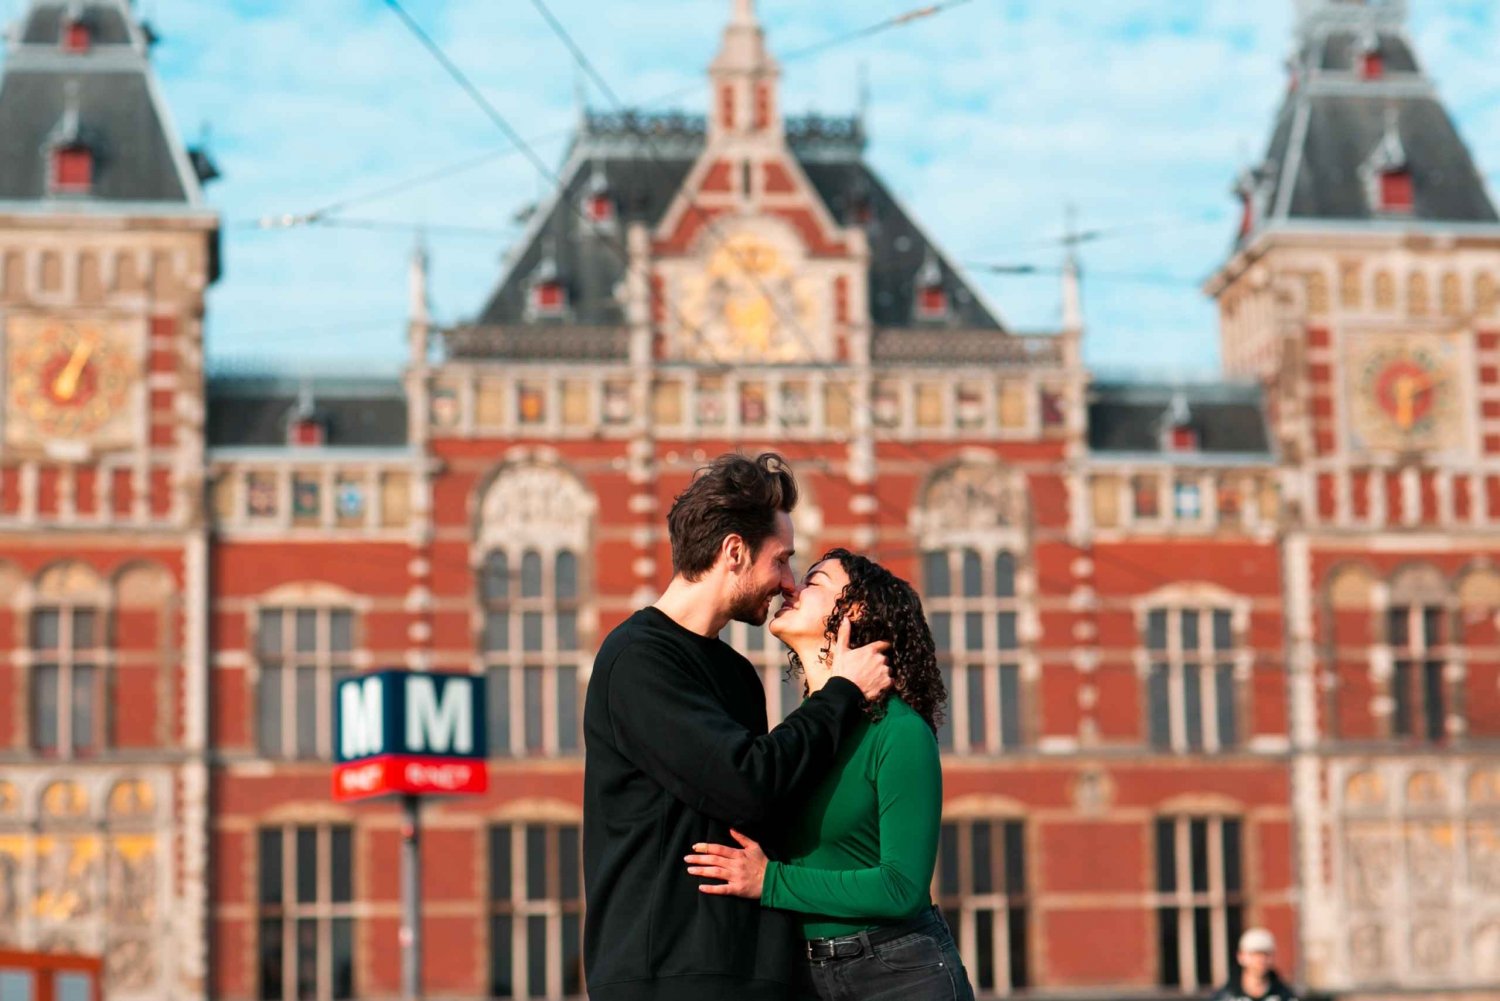 Amsterdam: Professional photoshoot at Centraal Station